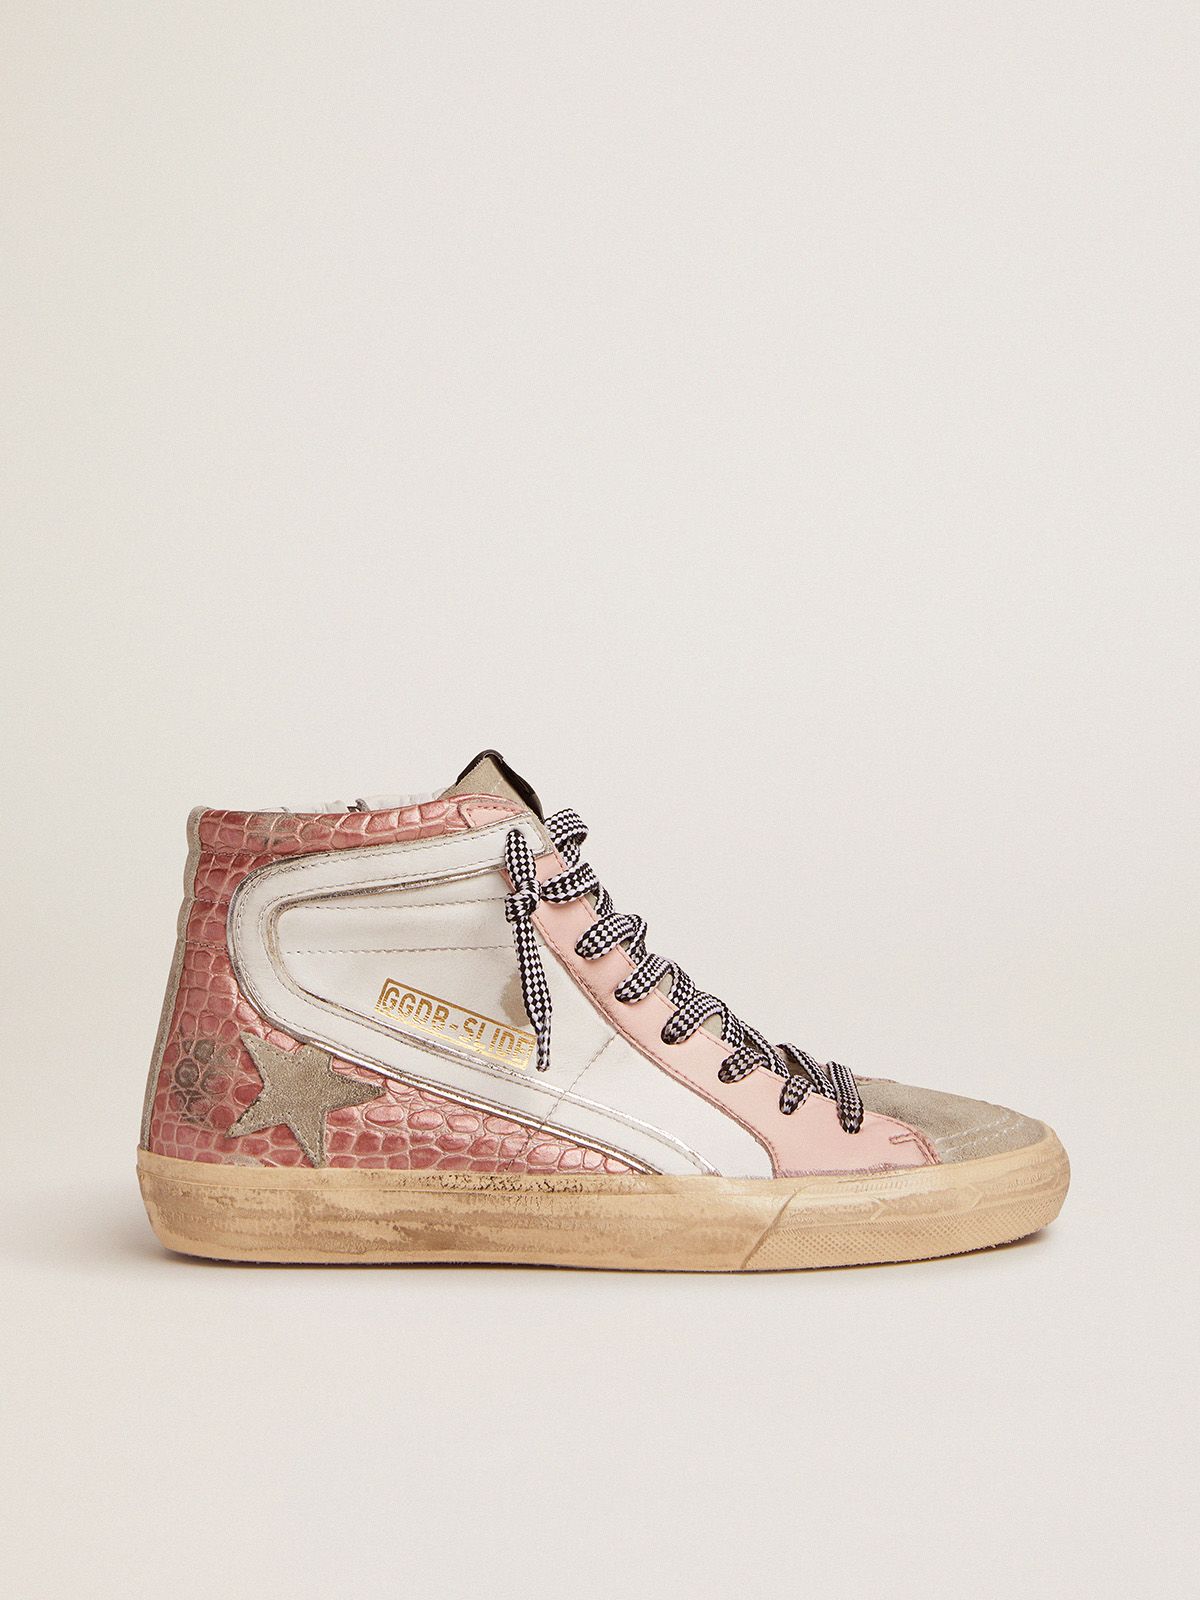 golden goose pink Slide sneakers with crocodile-print leather and white upper